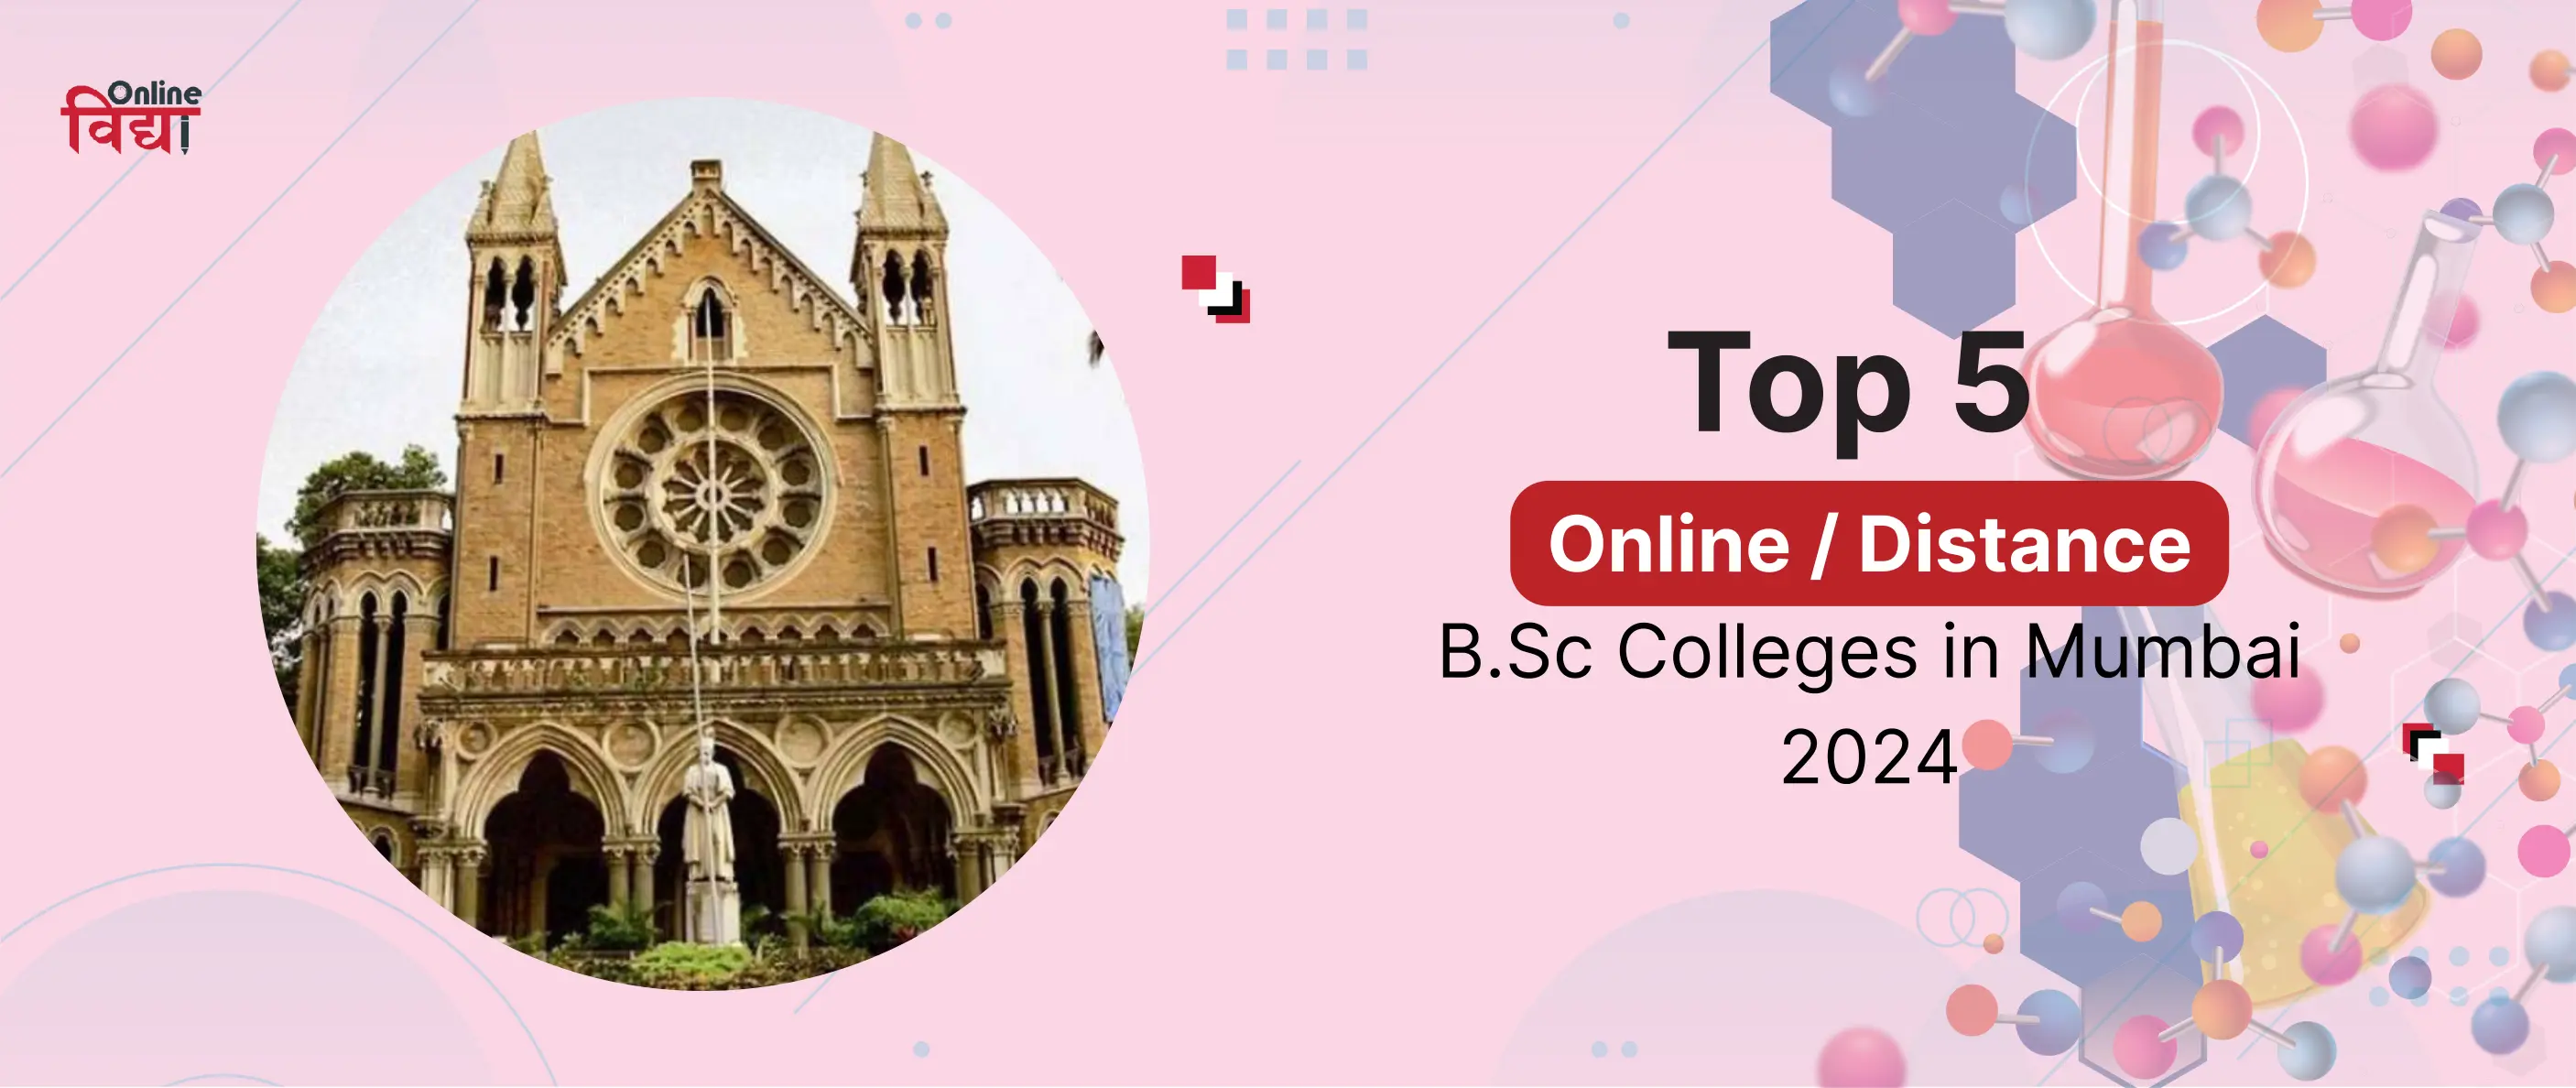 Top 5 Online/ Distance B.Sc Colleges in Mumbai 2024